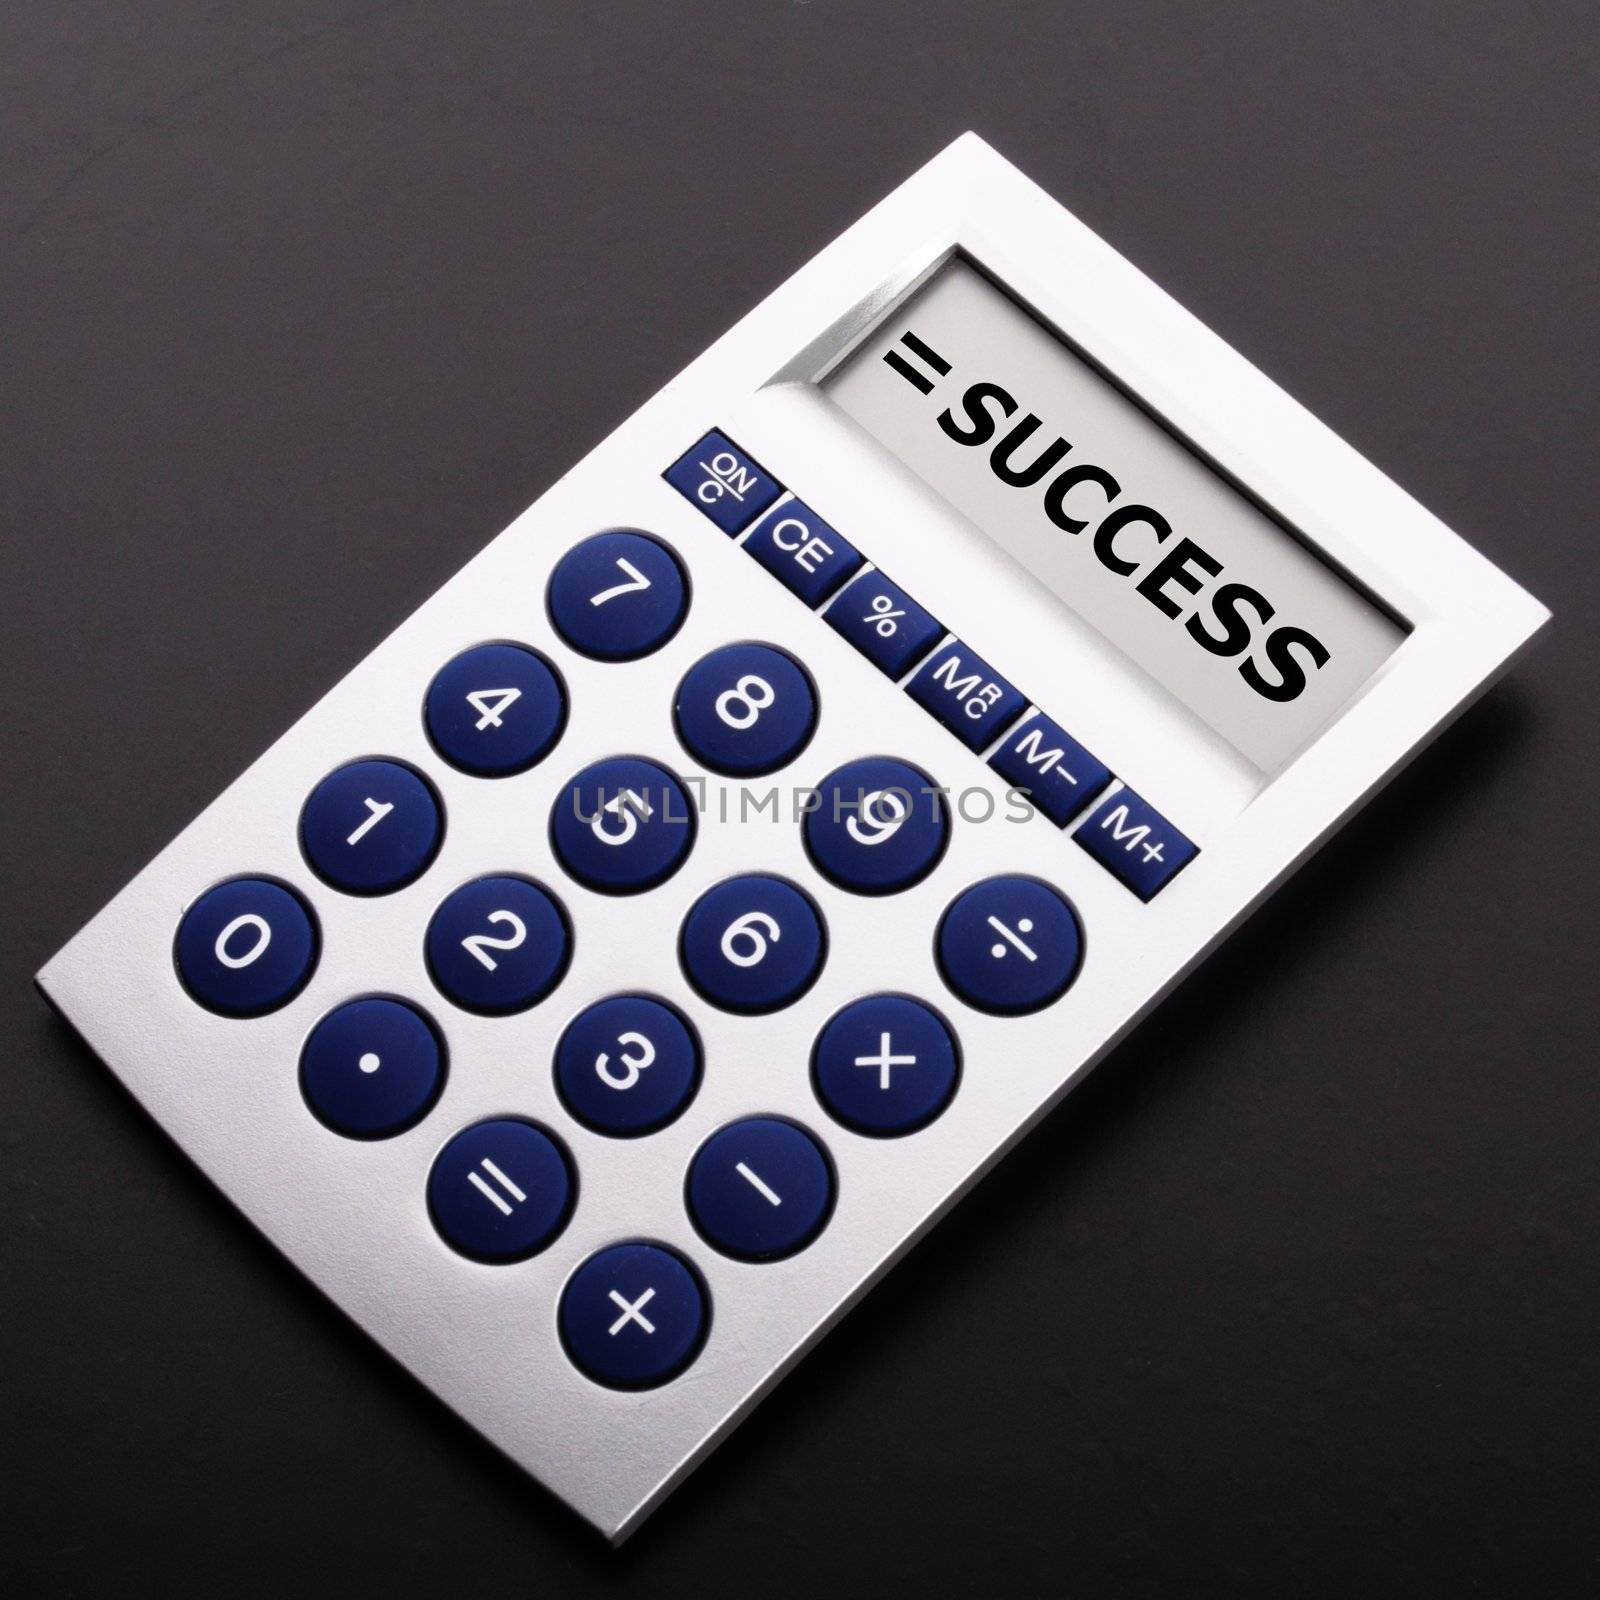 success concept with word on business calculator